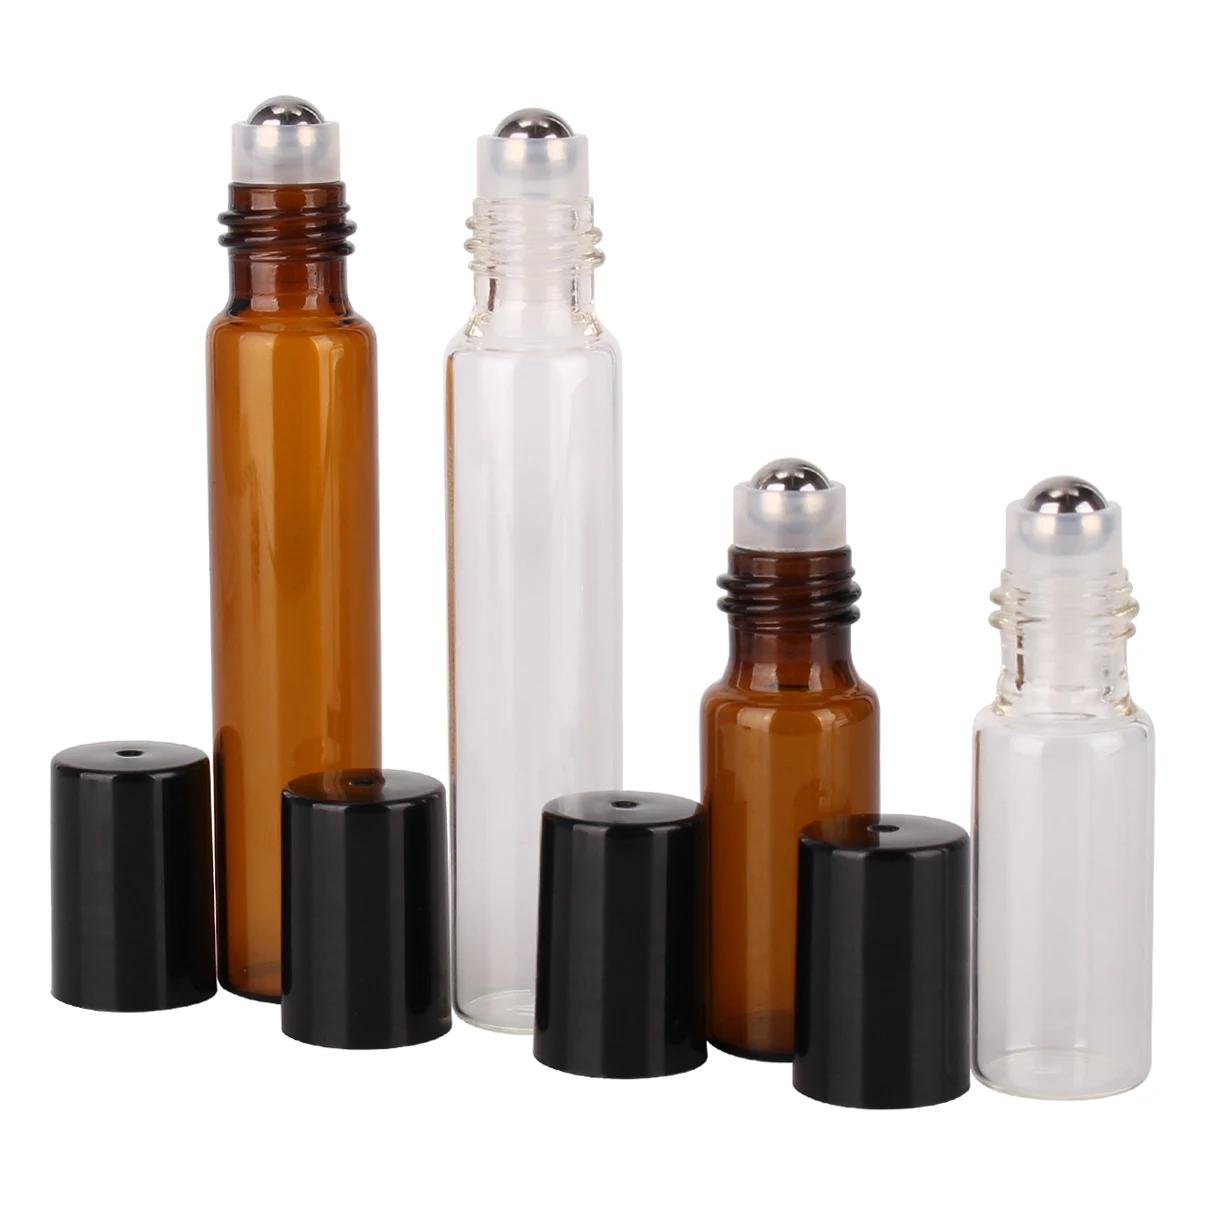 5 Pieces 5ml/10ml Amber/Transparent Glass Roll on BottlesStainless Steel Roller Ball for Aromatherapy Portable Trave